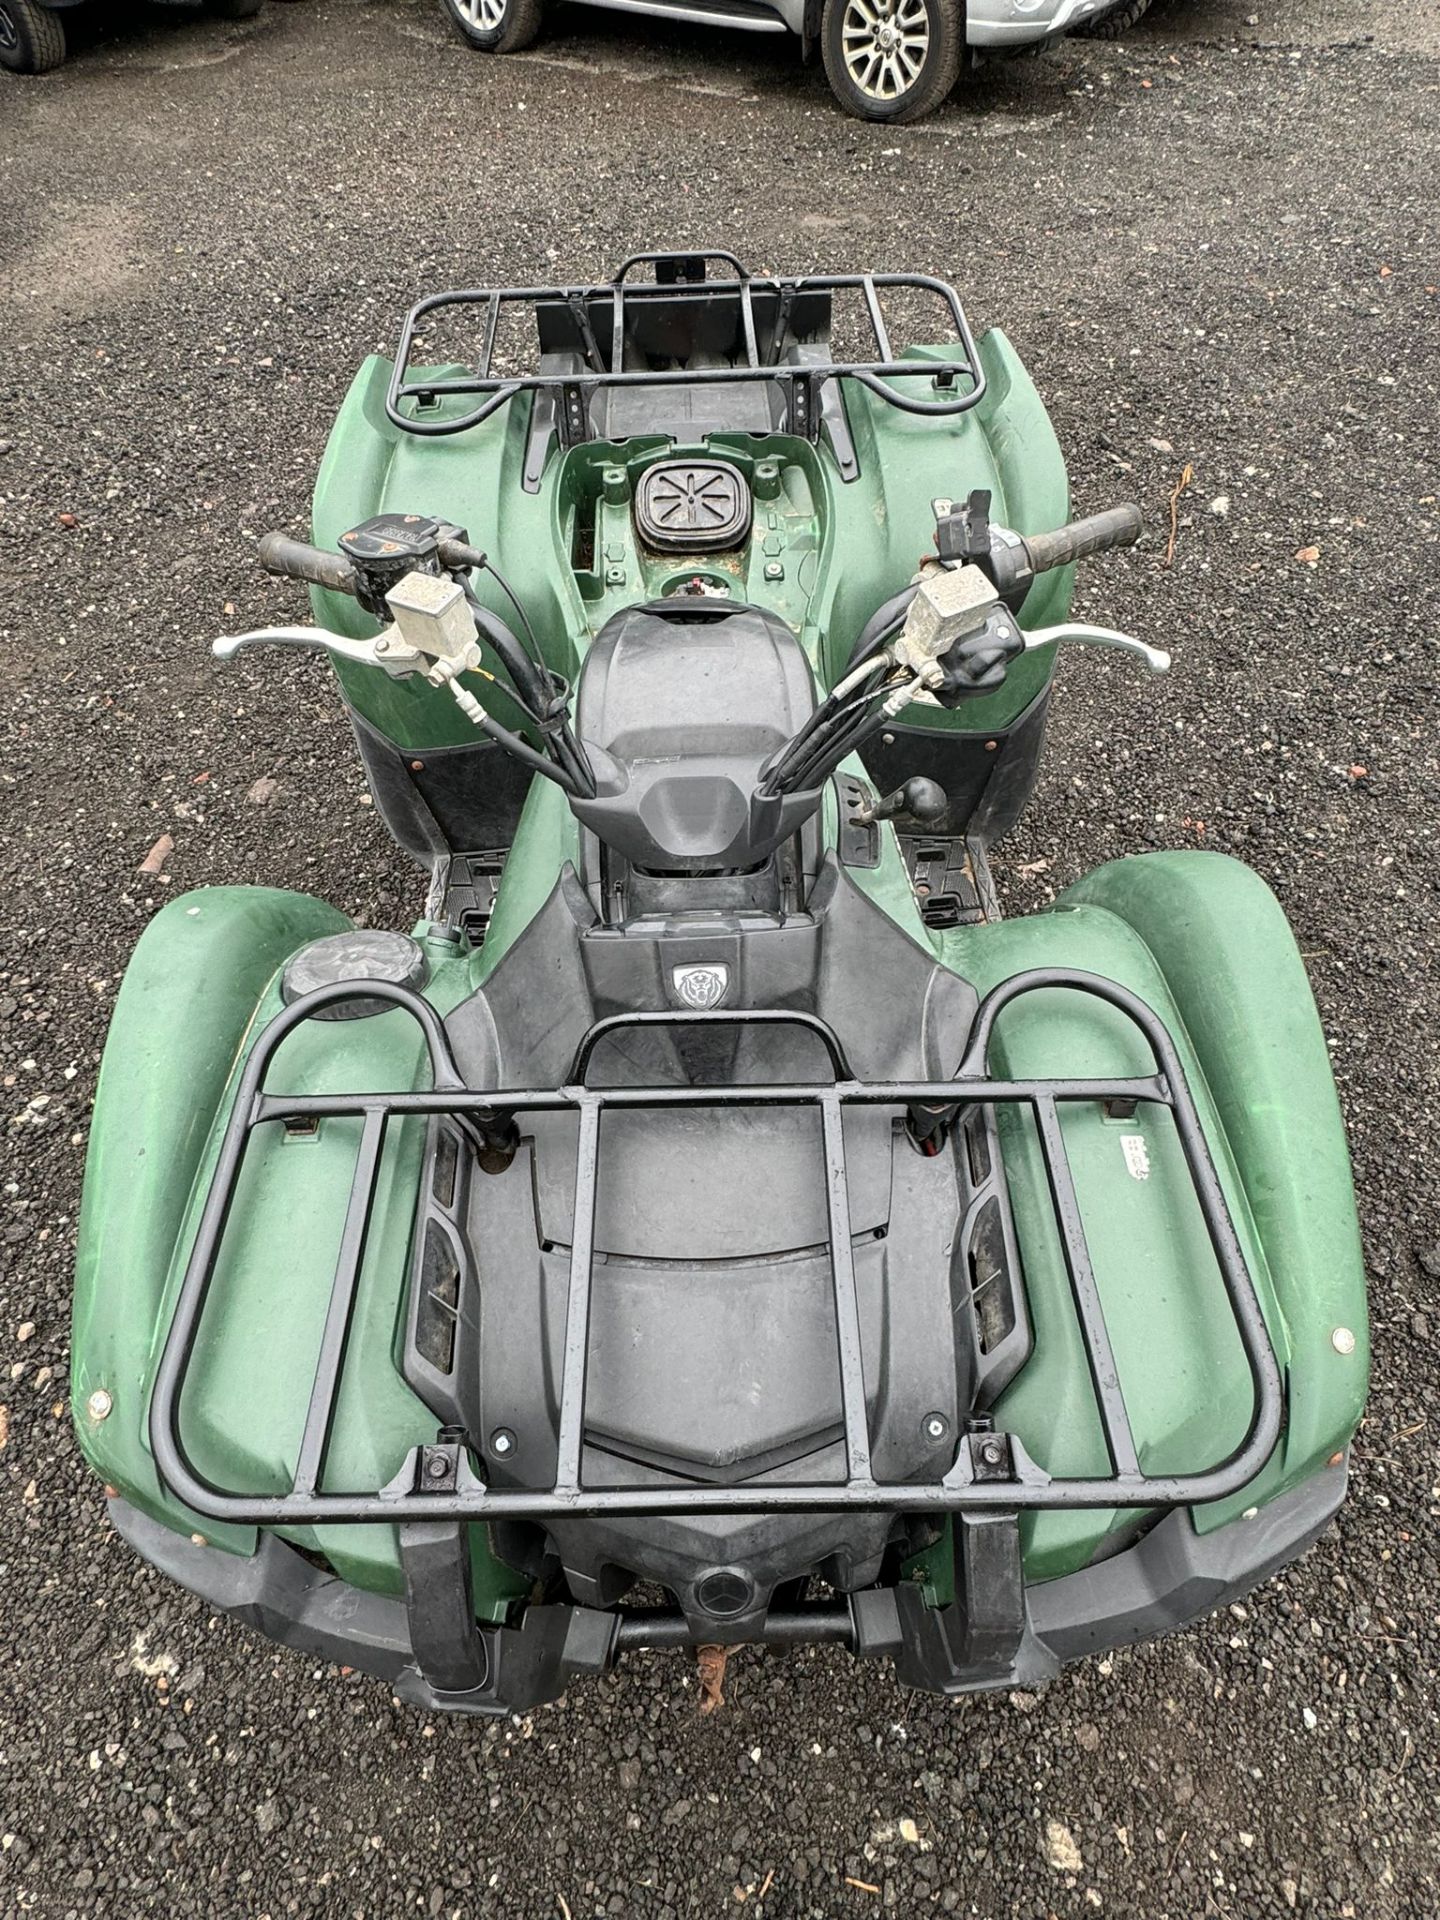 YAMAHA GRIZZLY 550 IRS 2015 - ROAD-READY ADVENTURE AWAITS! - Image 10 of 10